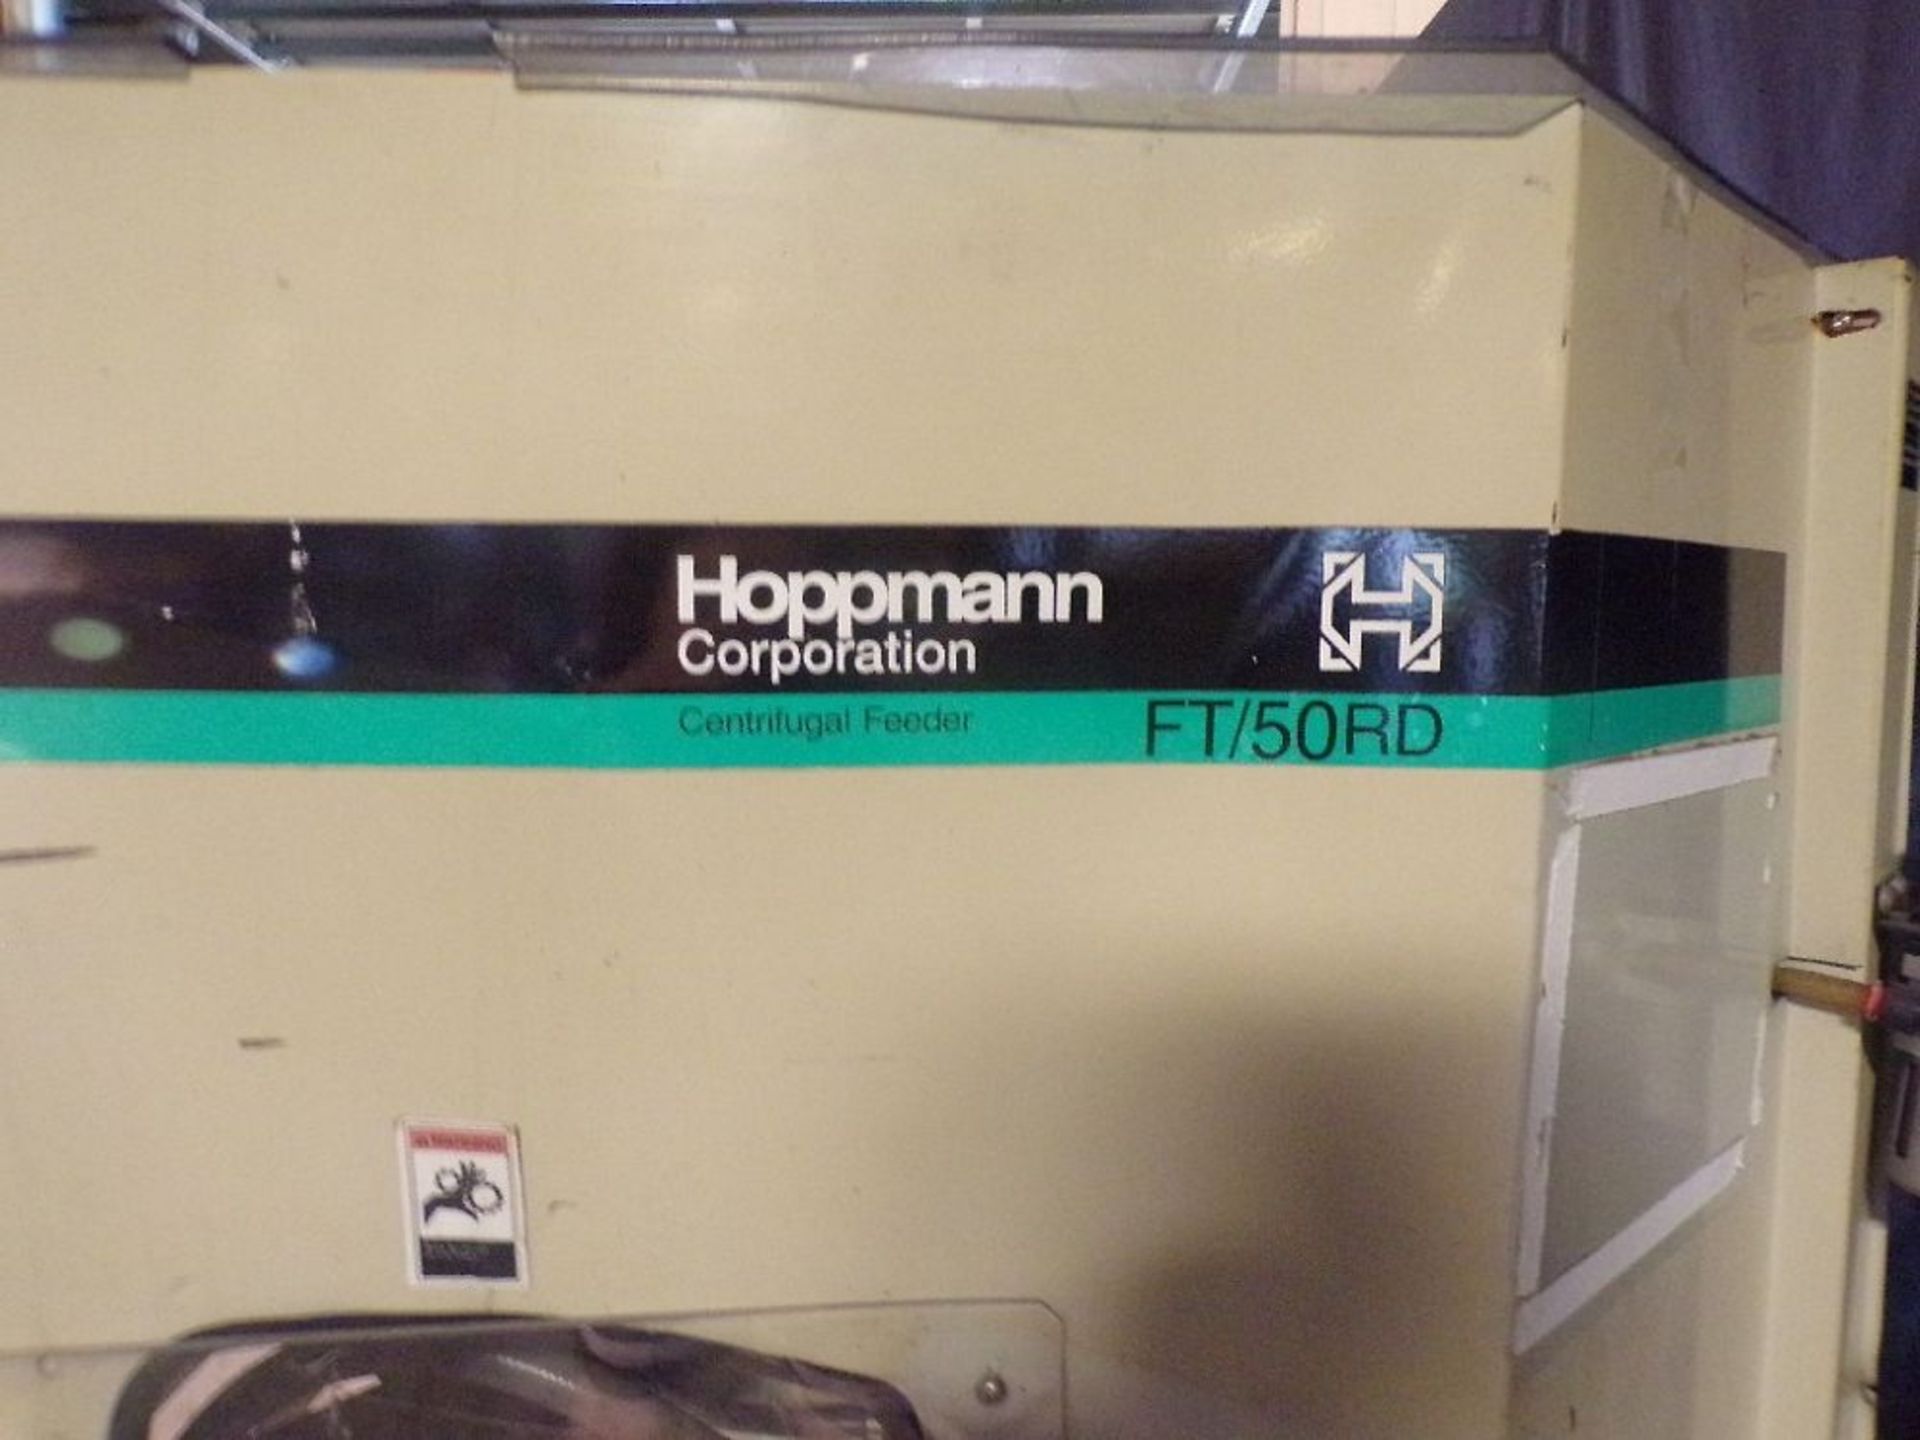 Qty (1) Hoppmann FT 50 Centrifugal Sorter - FT/50RD - In excellent running condition - Includes - Image 2 of 8